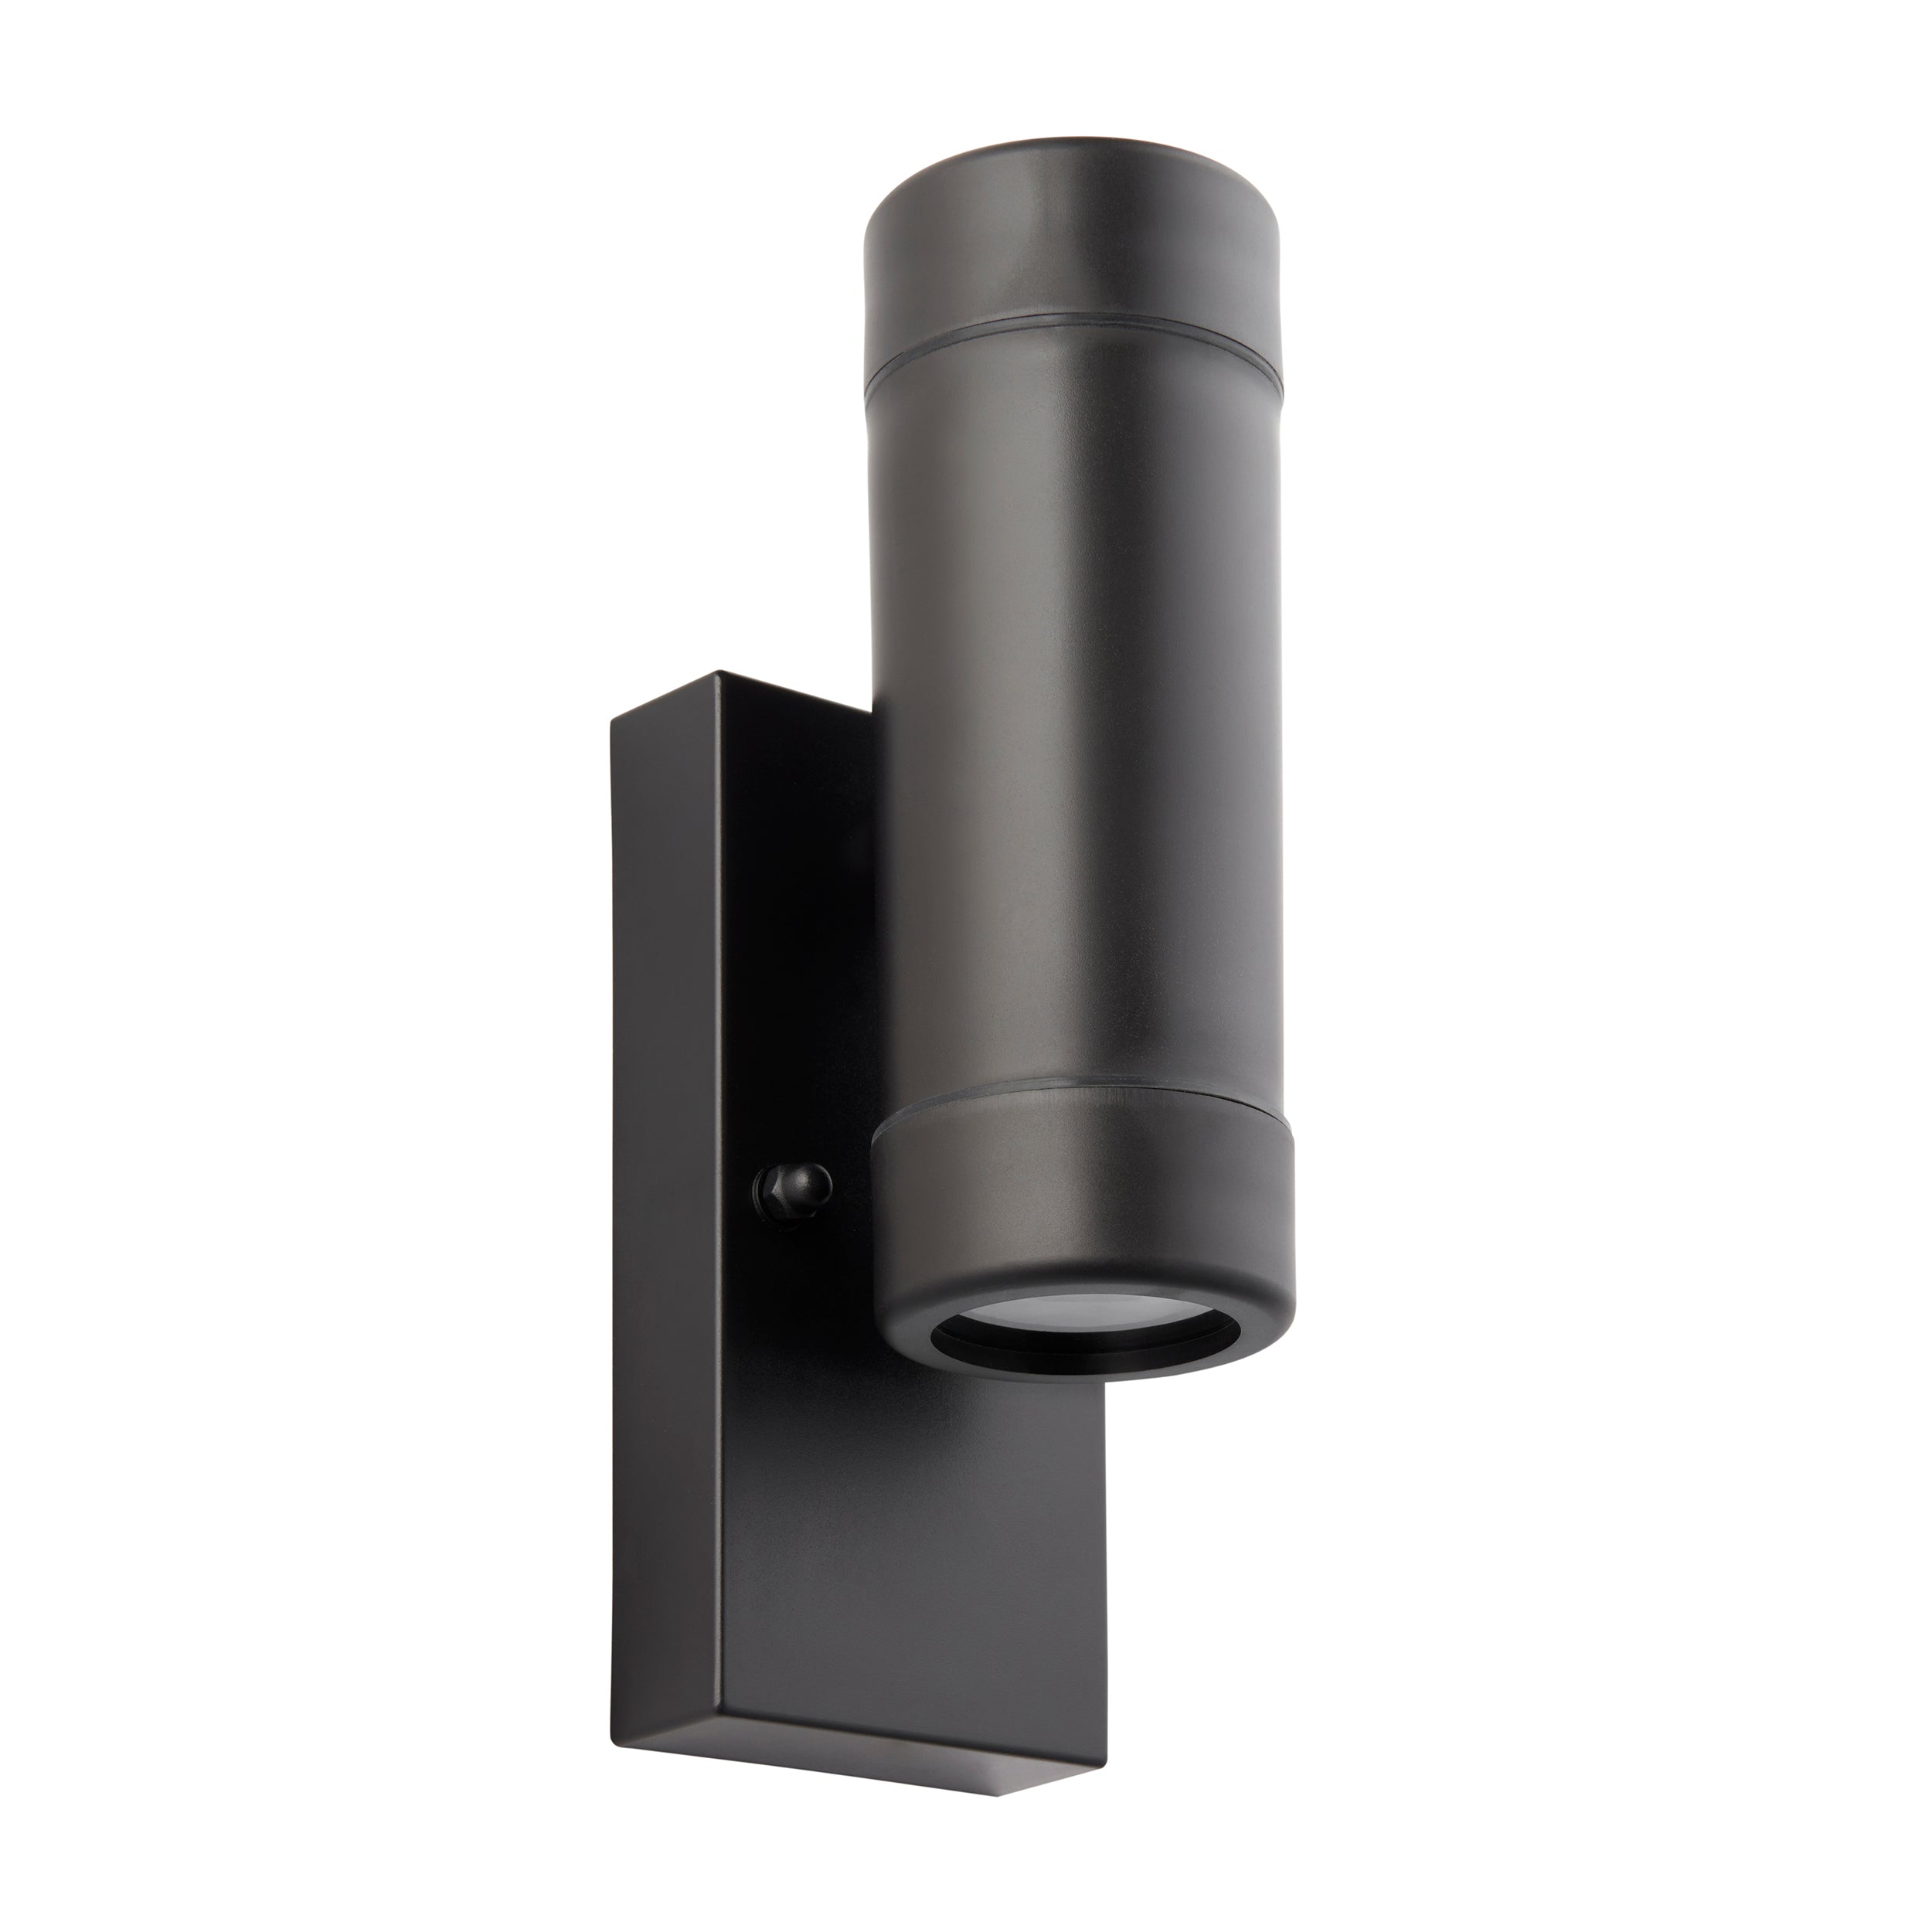 Icarus Up & Down Outdoor Wall Light with Daylight Sensor